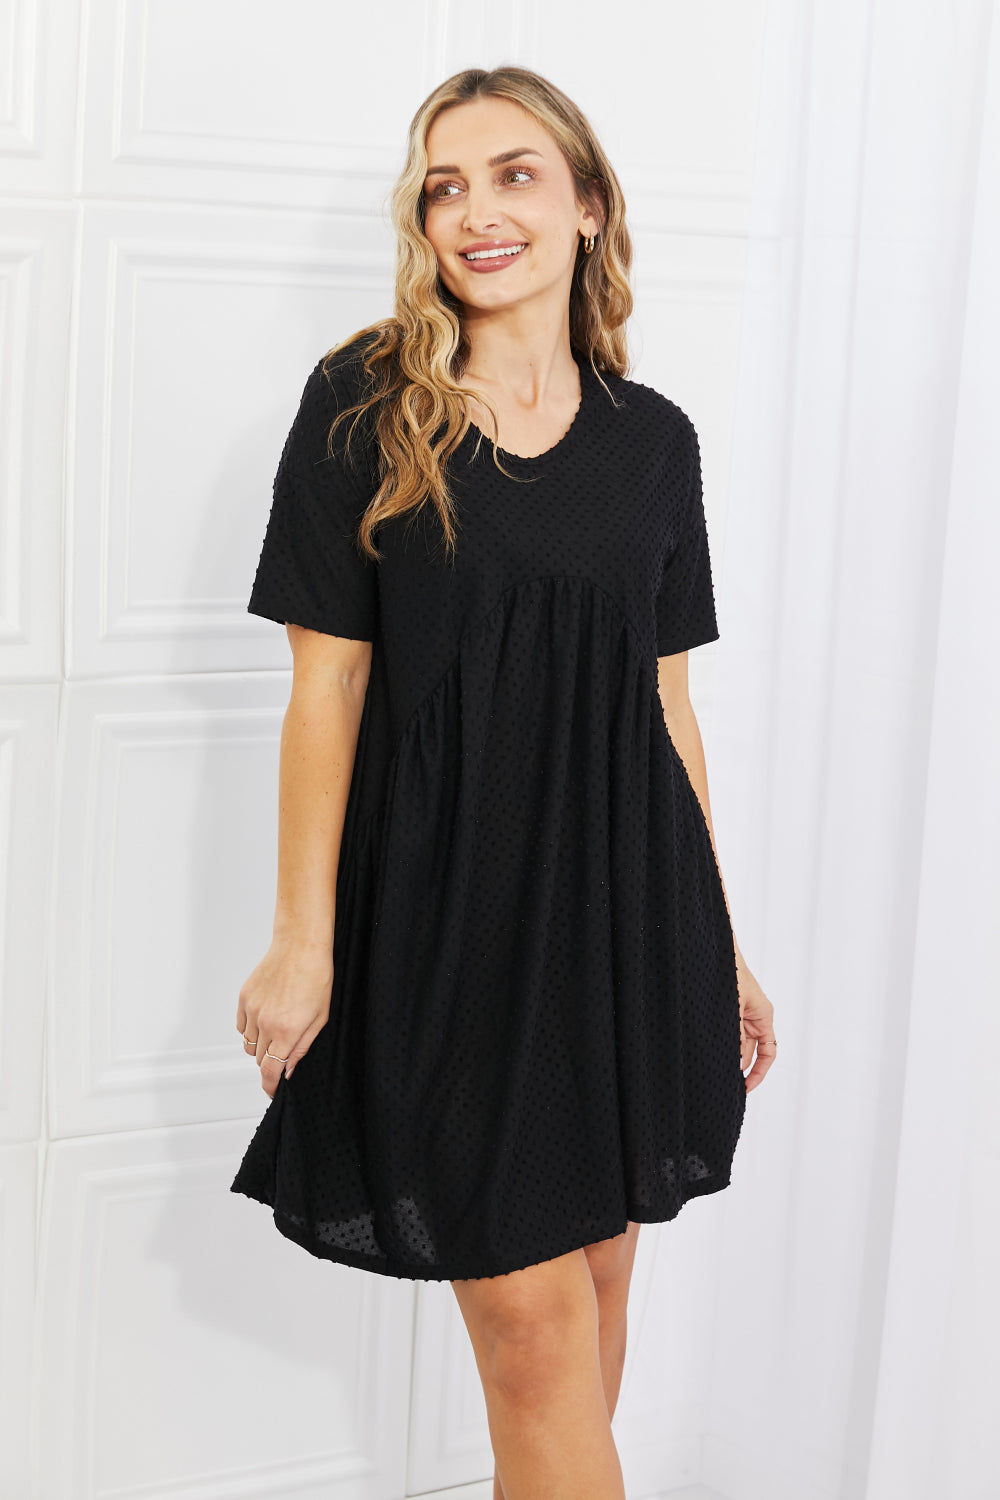 BOMBOM Another Day Swiss Dot Casual Dress in Black - Online Only